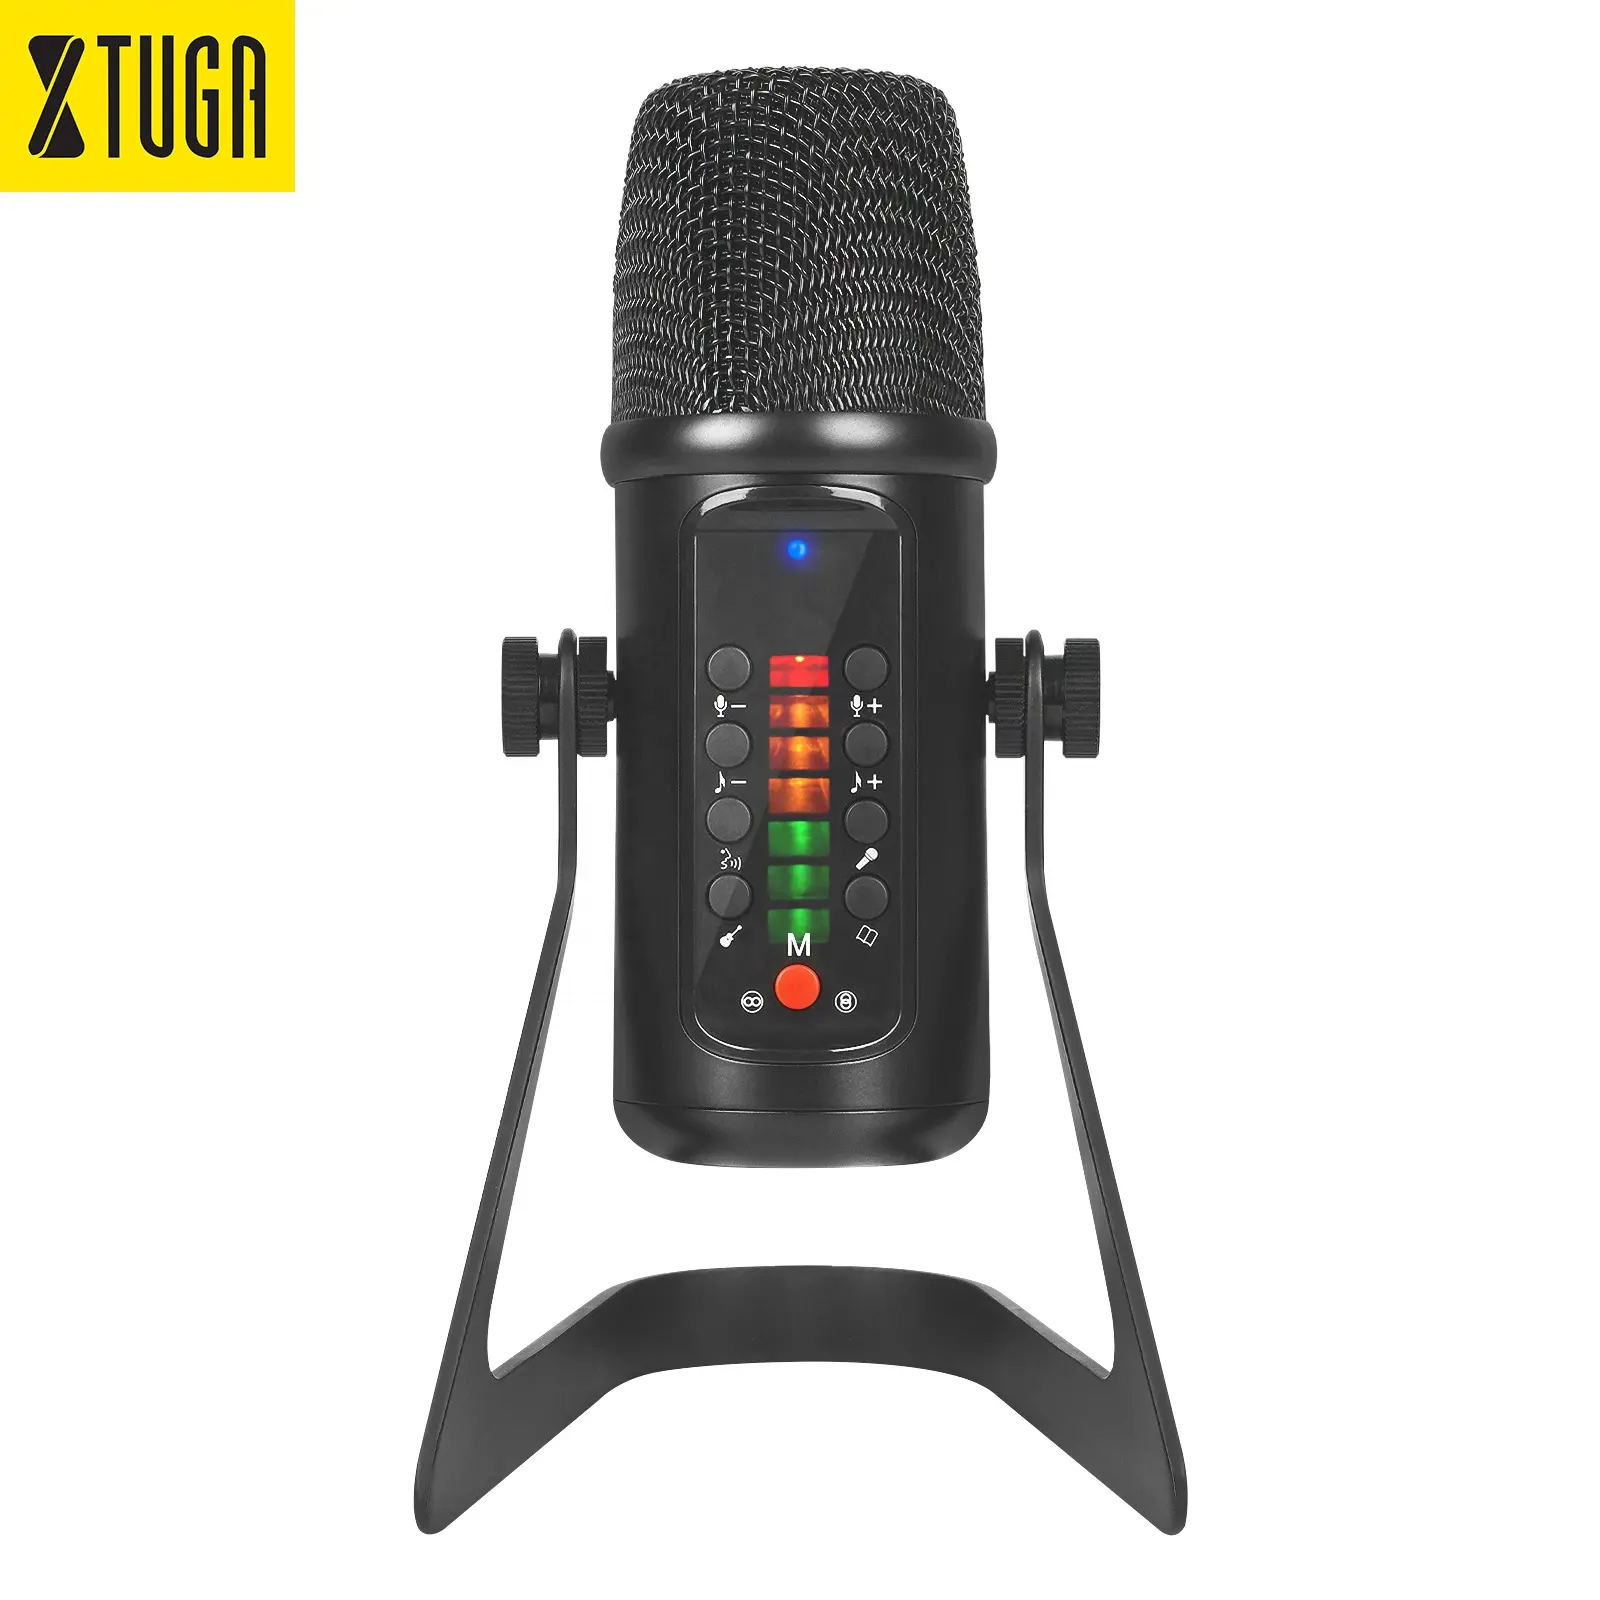 Stereo Condenser Microphone China Trade,Buy China Direct From 